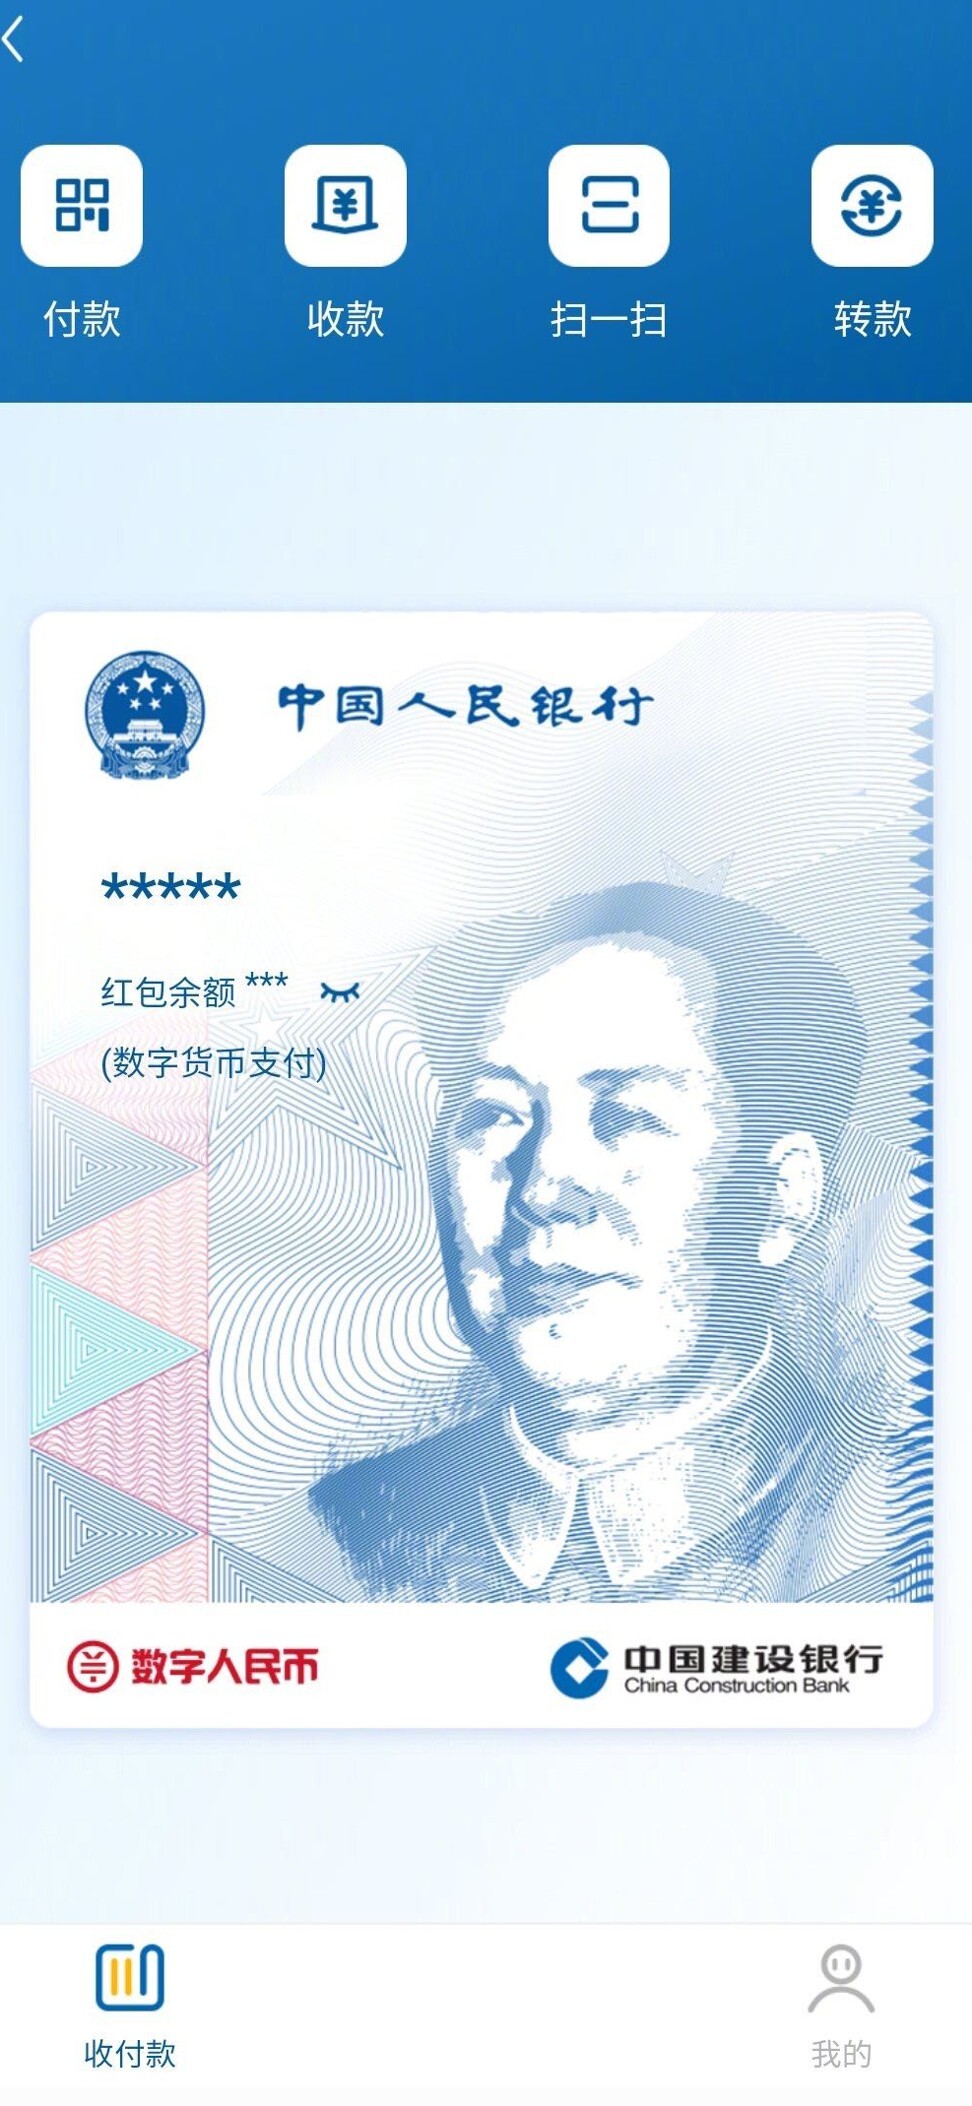 The digital yuan, officially known as the Digital Currency Electronic Payment (DCEP), is part of China’s plan to move towards a cashless society. Photo: WeChat